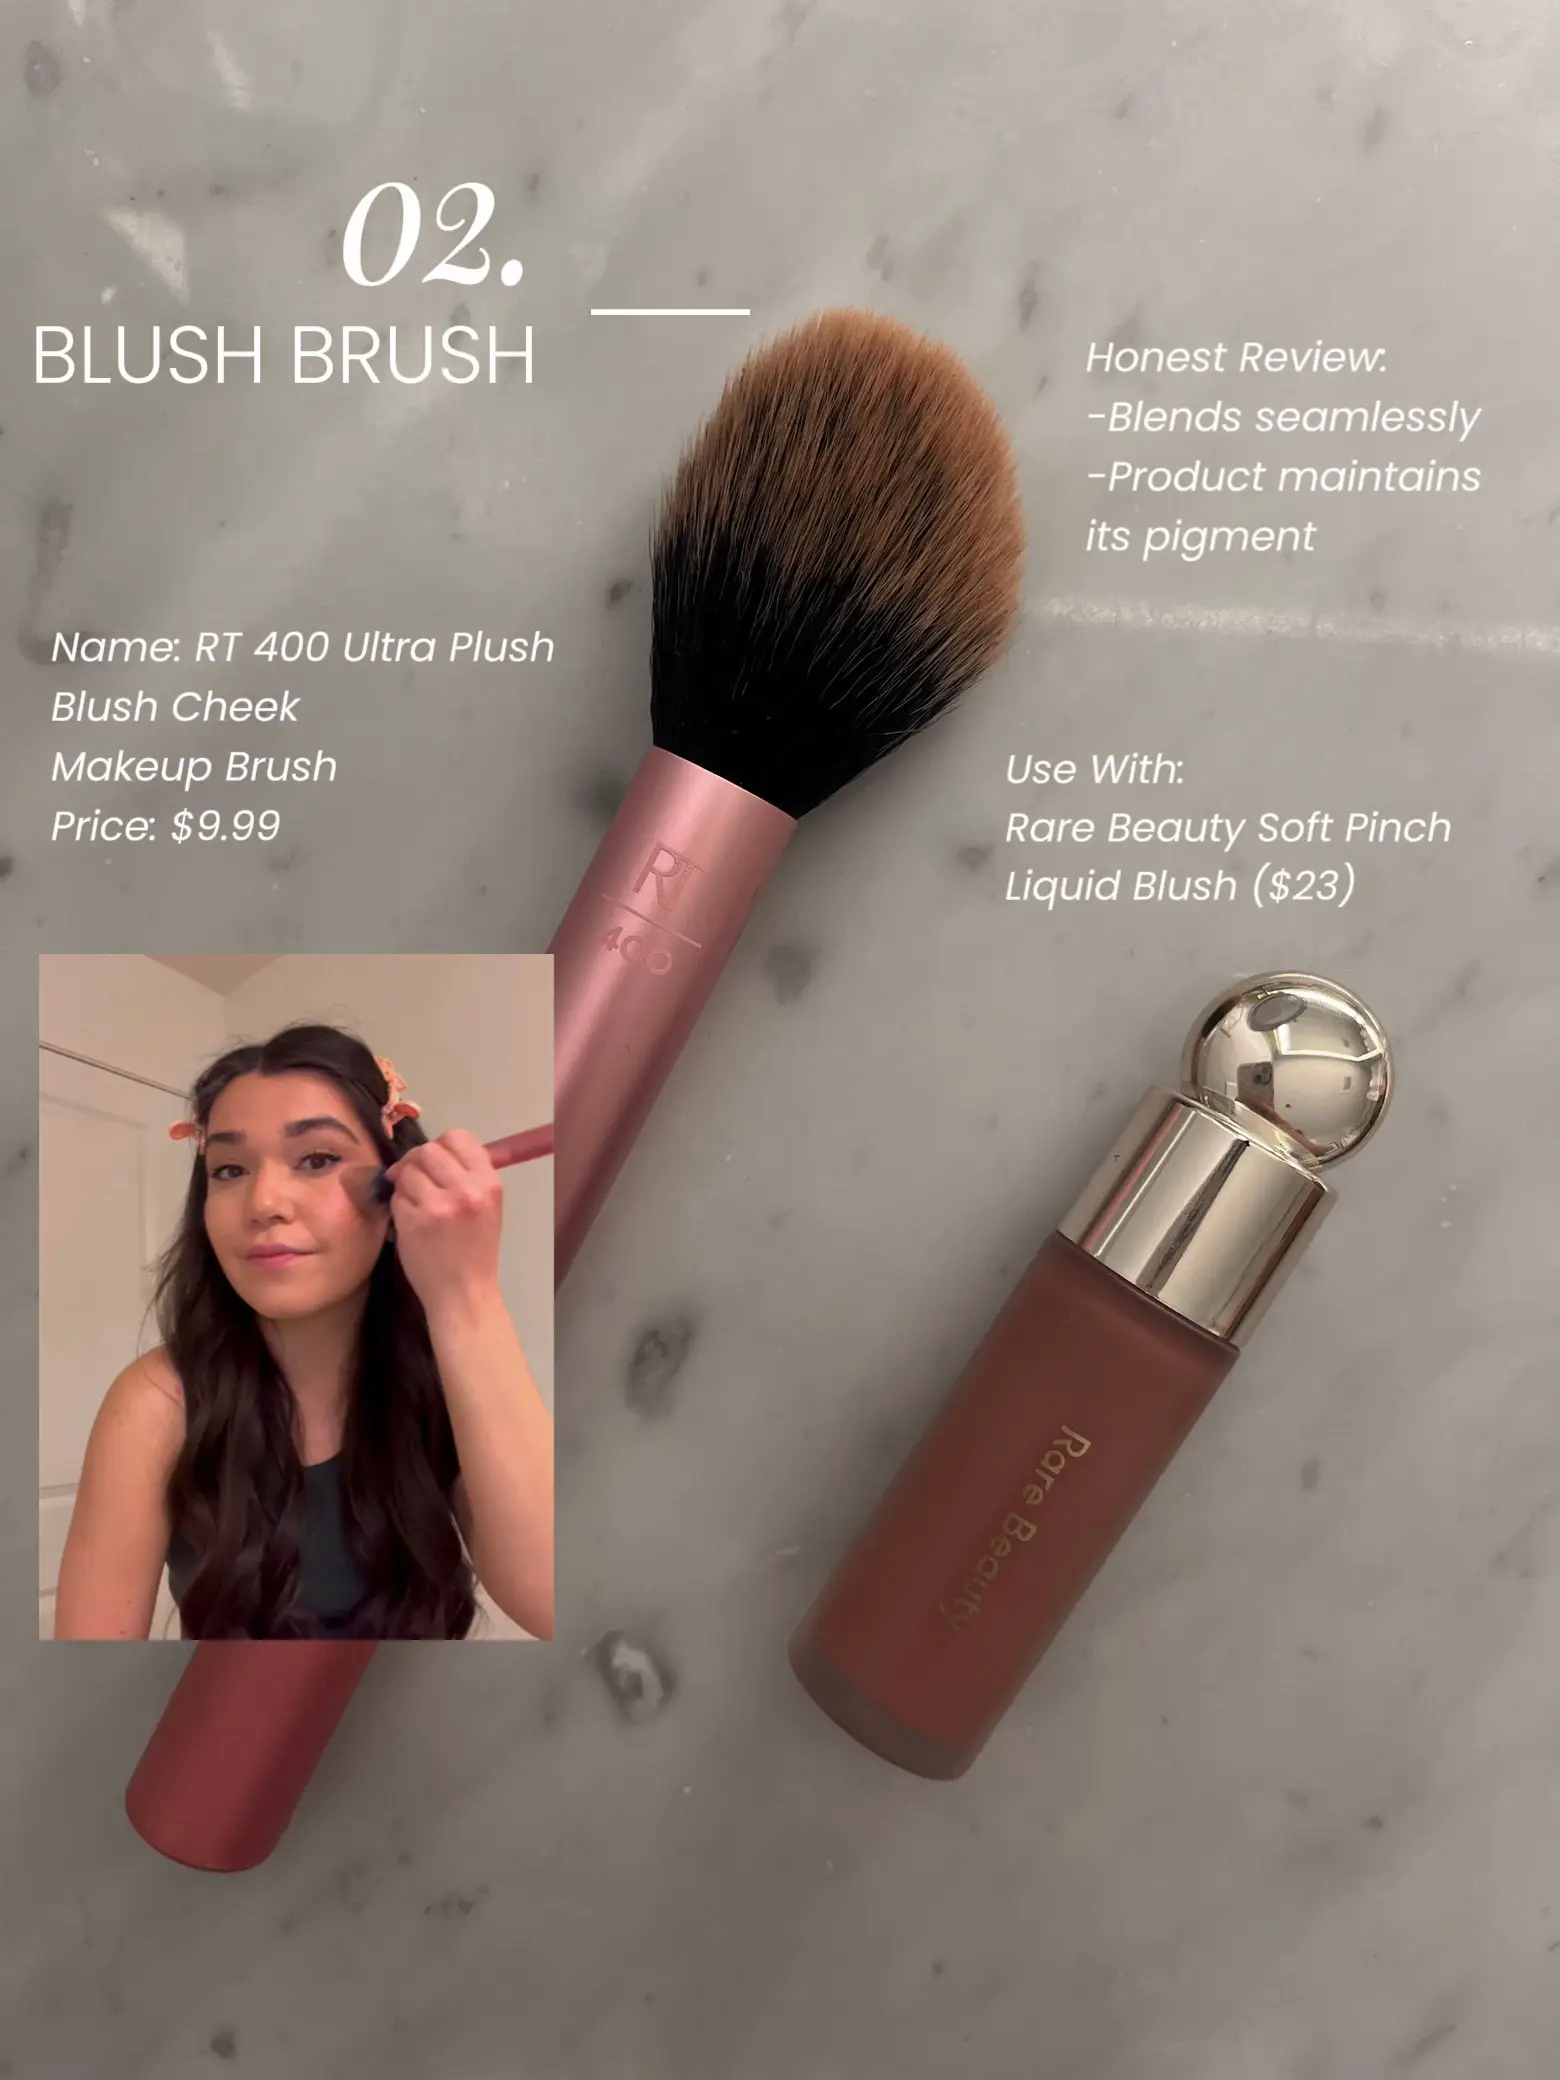 My Favorite Makeup Brushes From Real